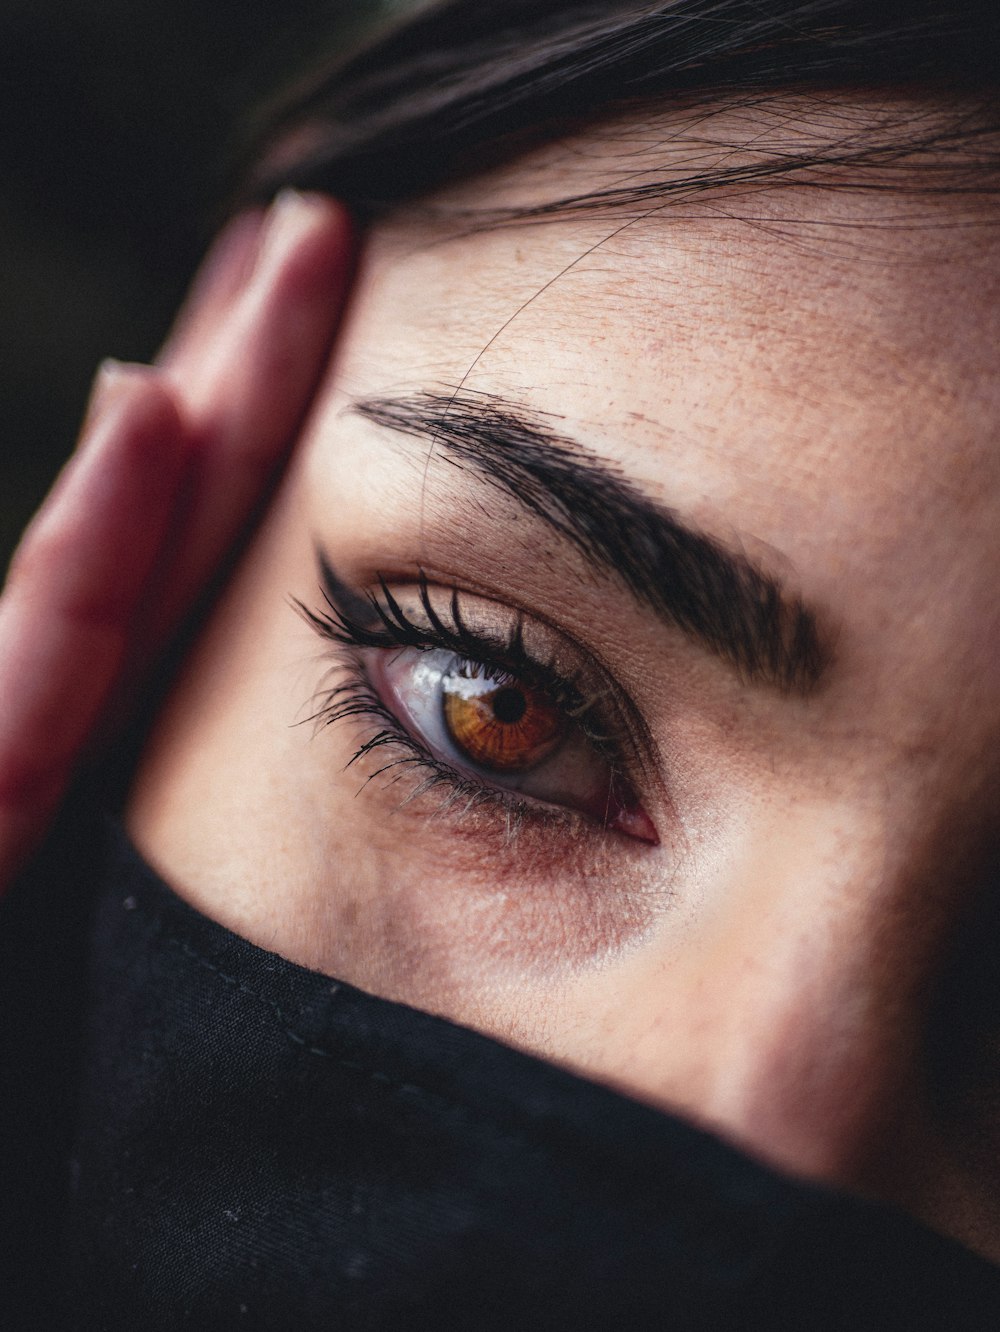 Woman Eyes Pictures | Download Free Images on Unsplash